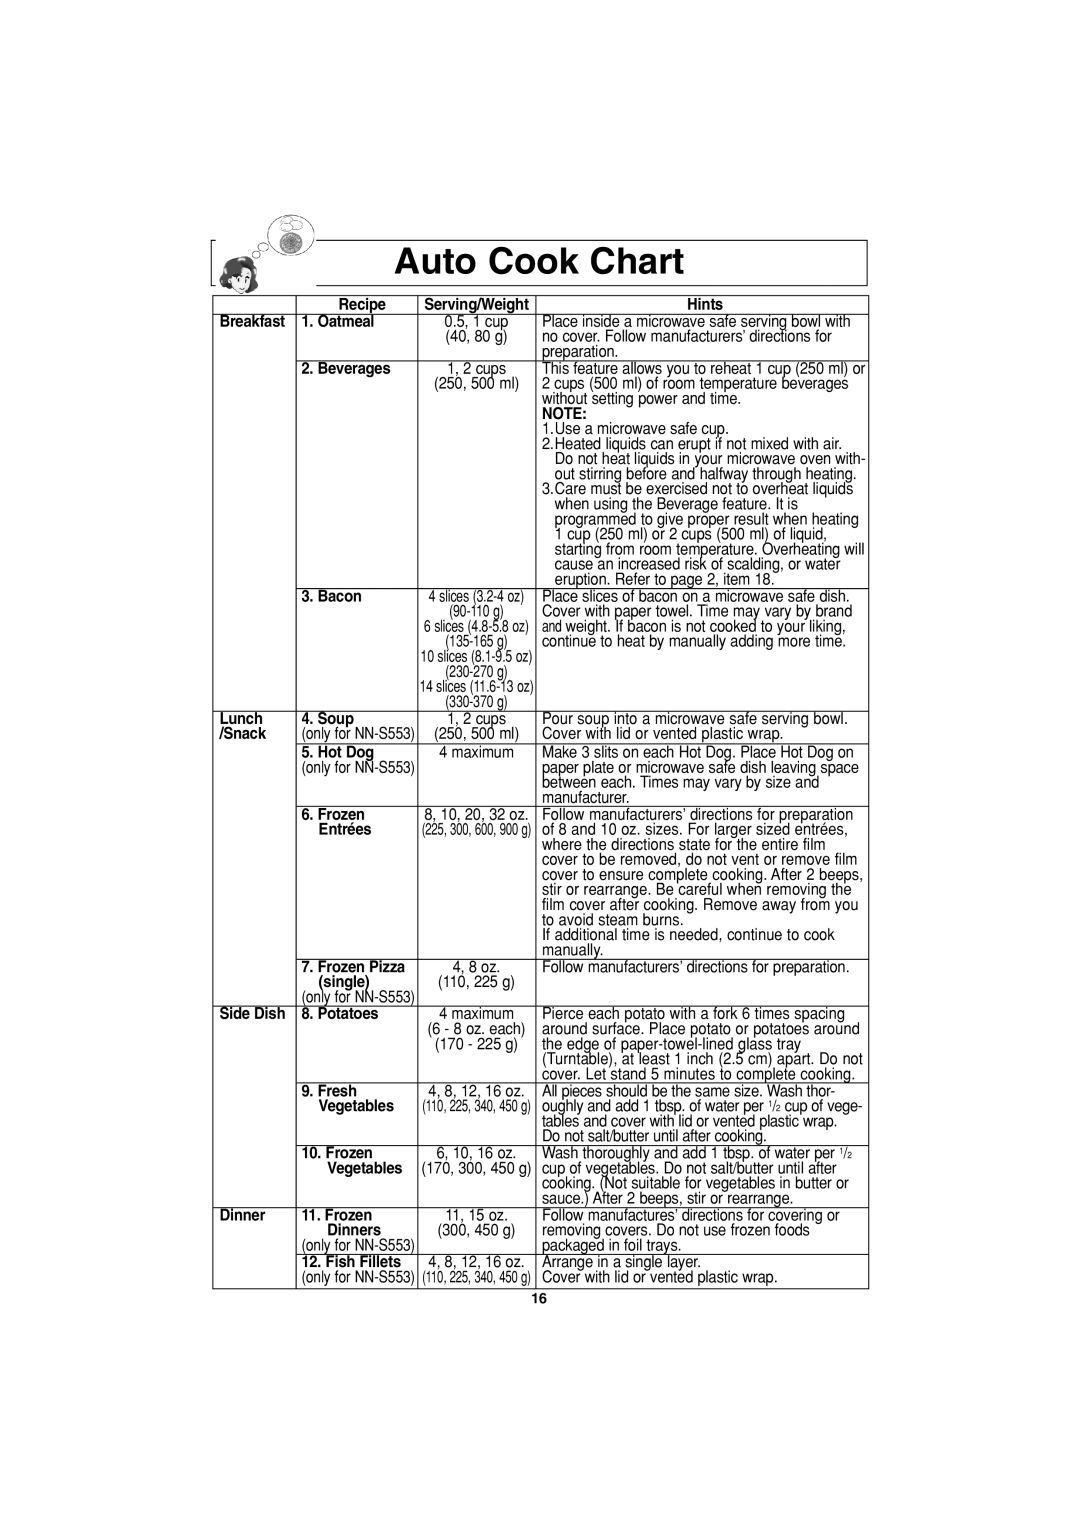 Panasonic NN-S553, NN-S503 important safety instructions Auto Cook Chart 